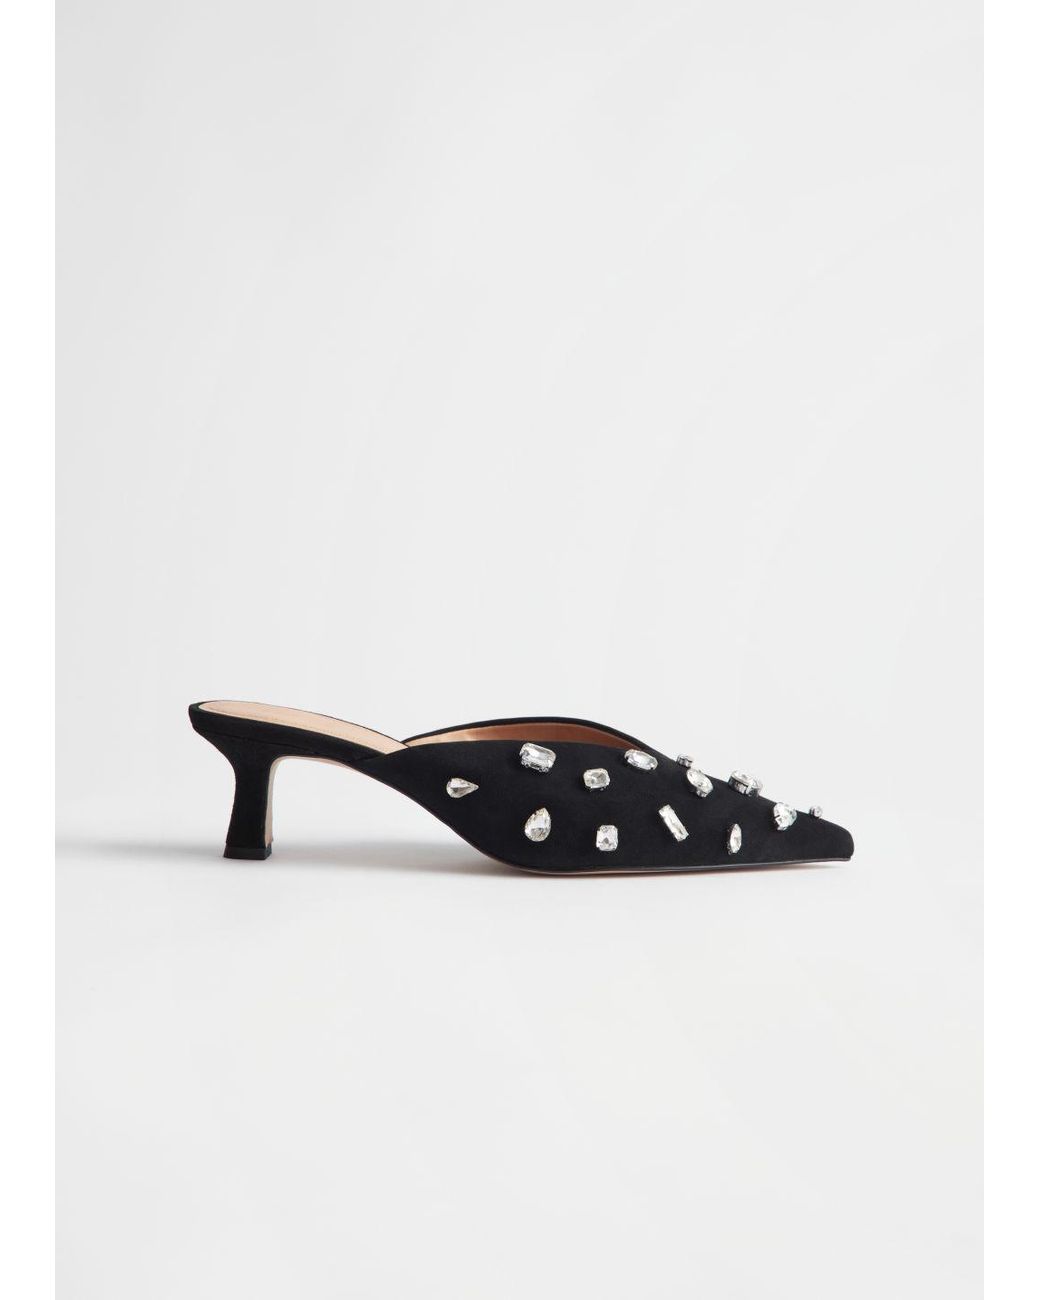  Other Stories Rhinestone Embellished Suede Mules in Black